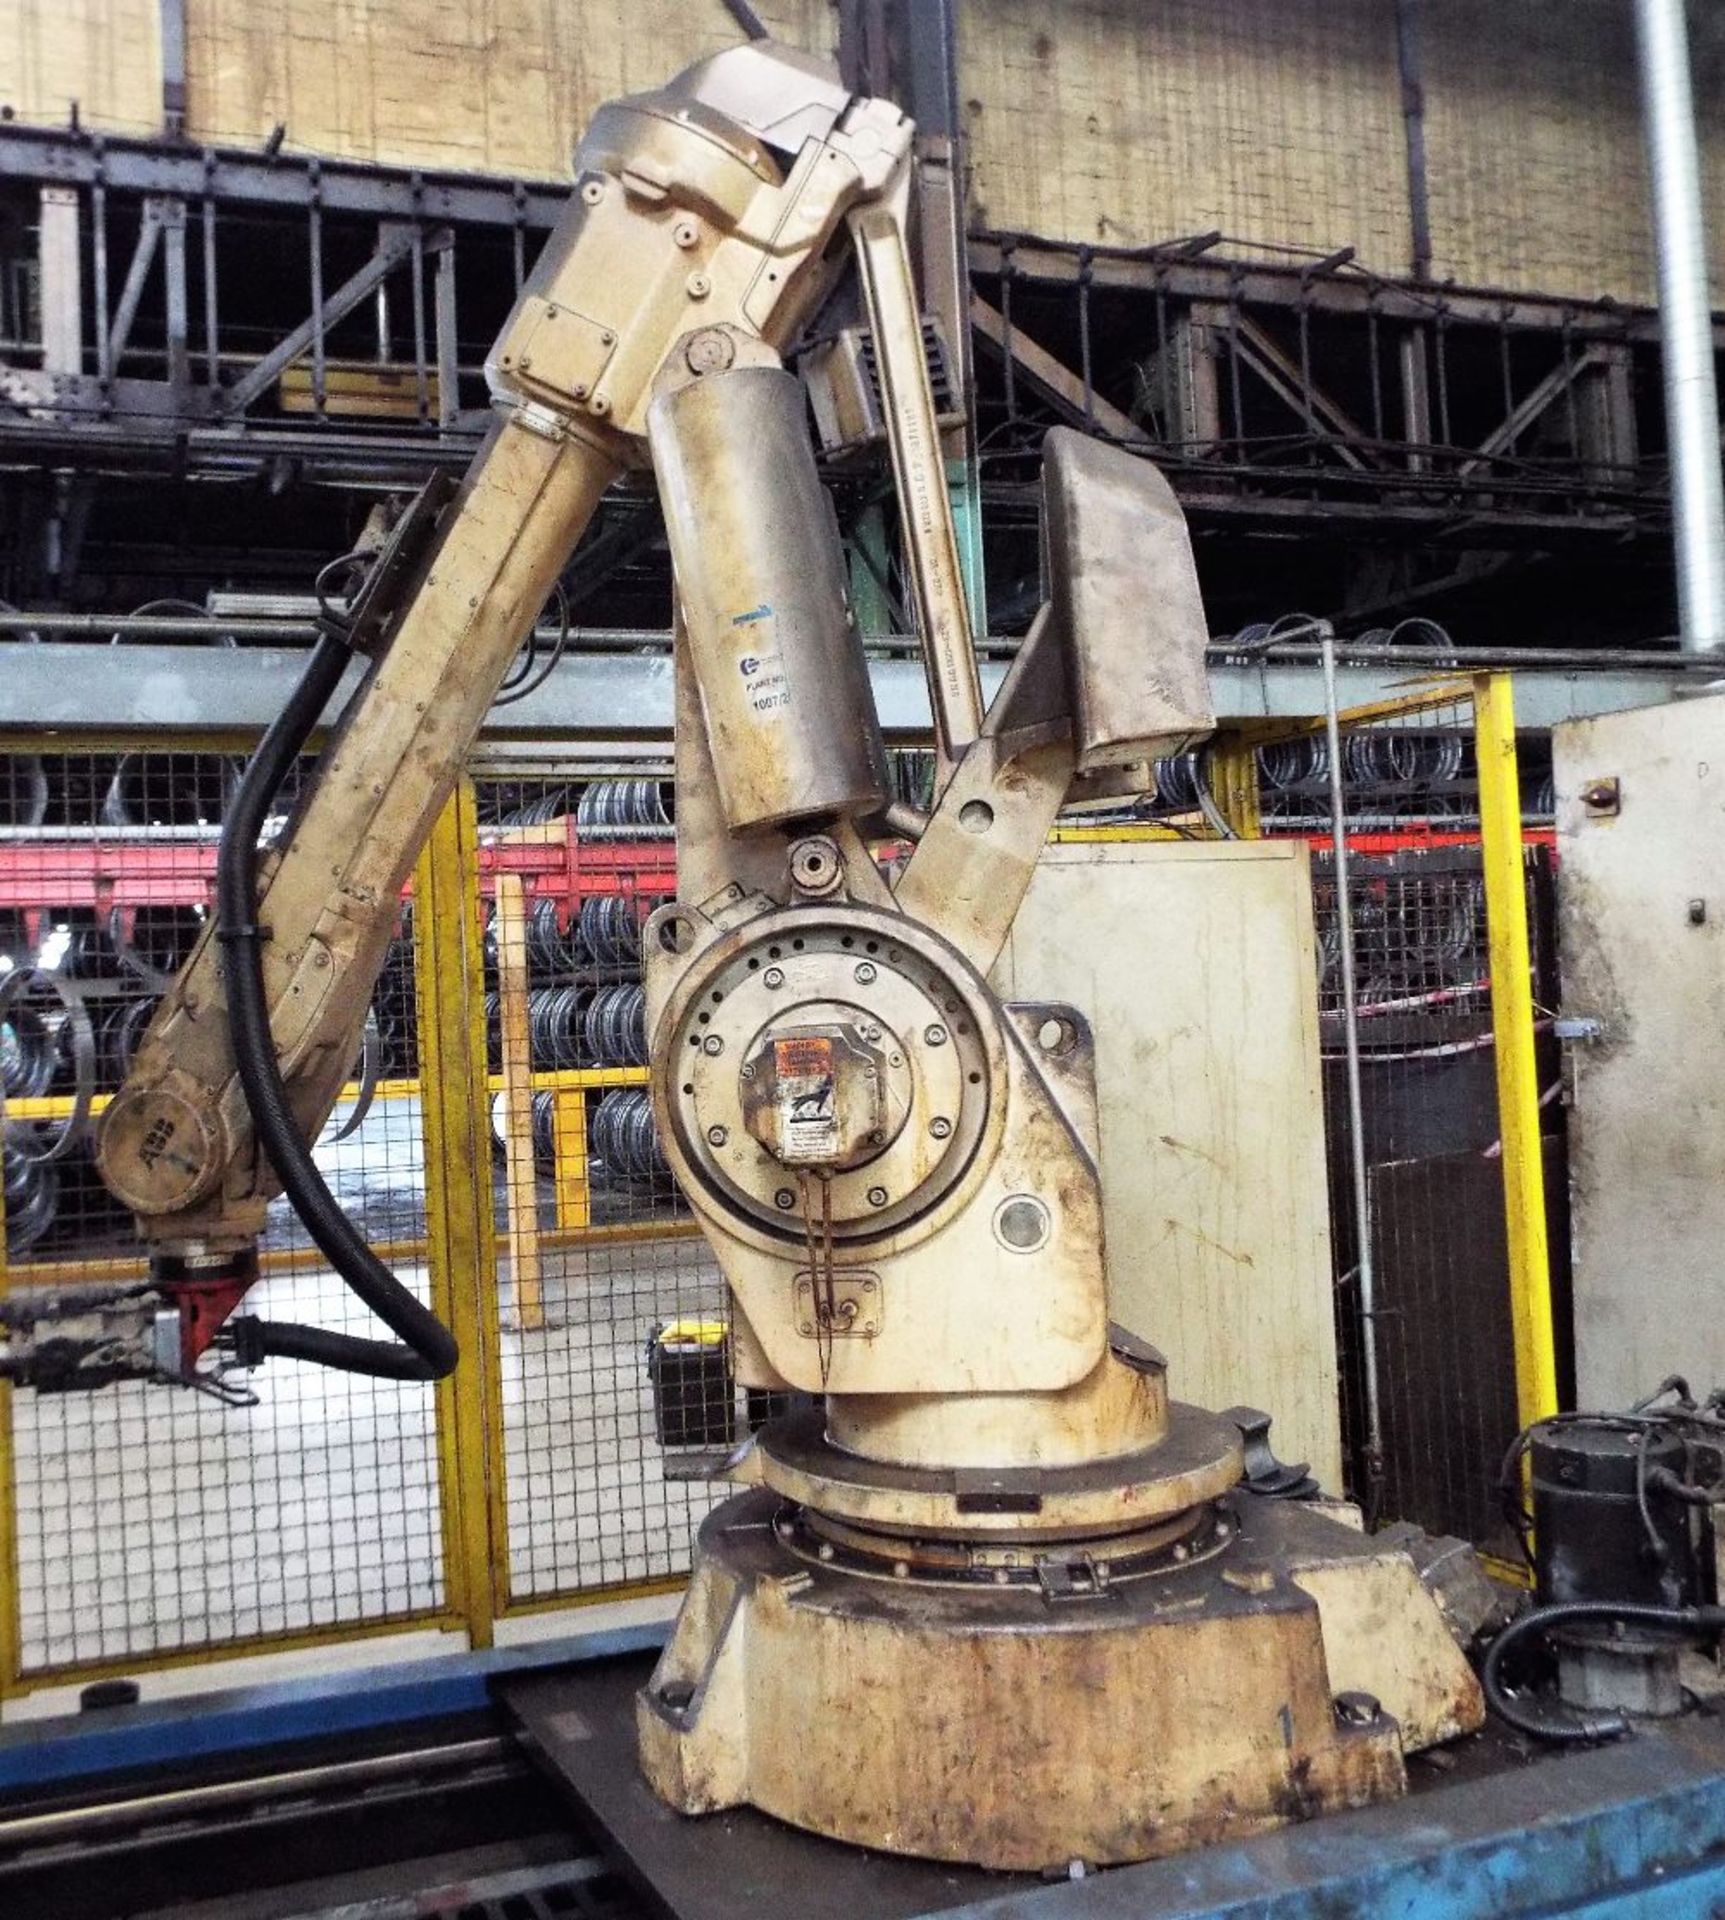 ABB-IRB-6400 6 Axis Robot Atttached To 7th Axis Powered Conveyor.